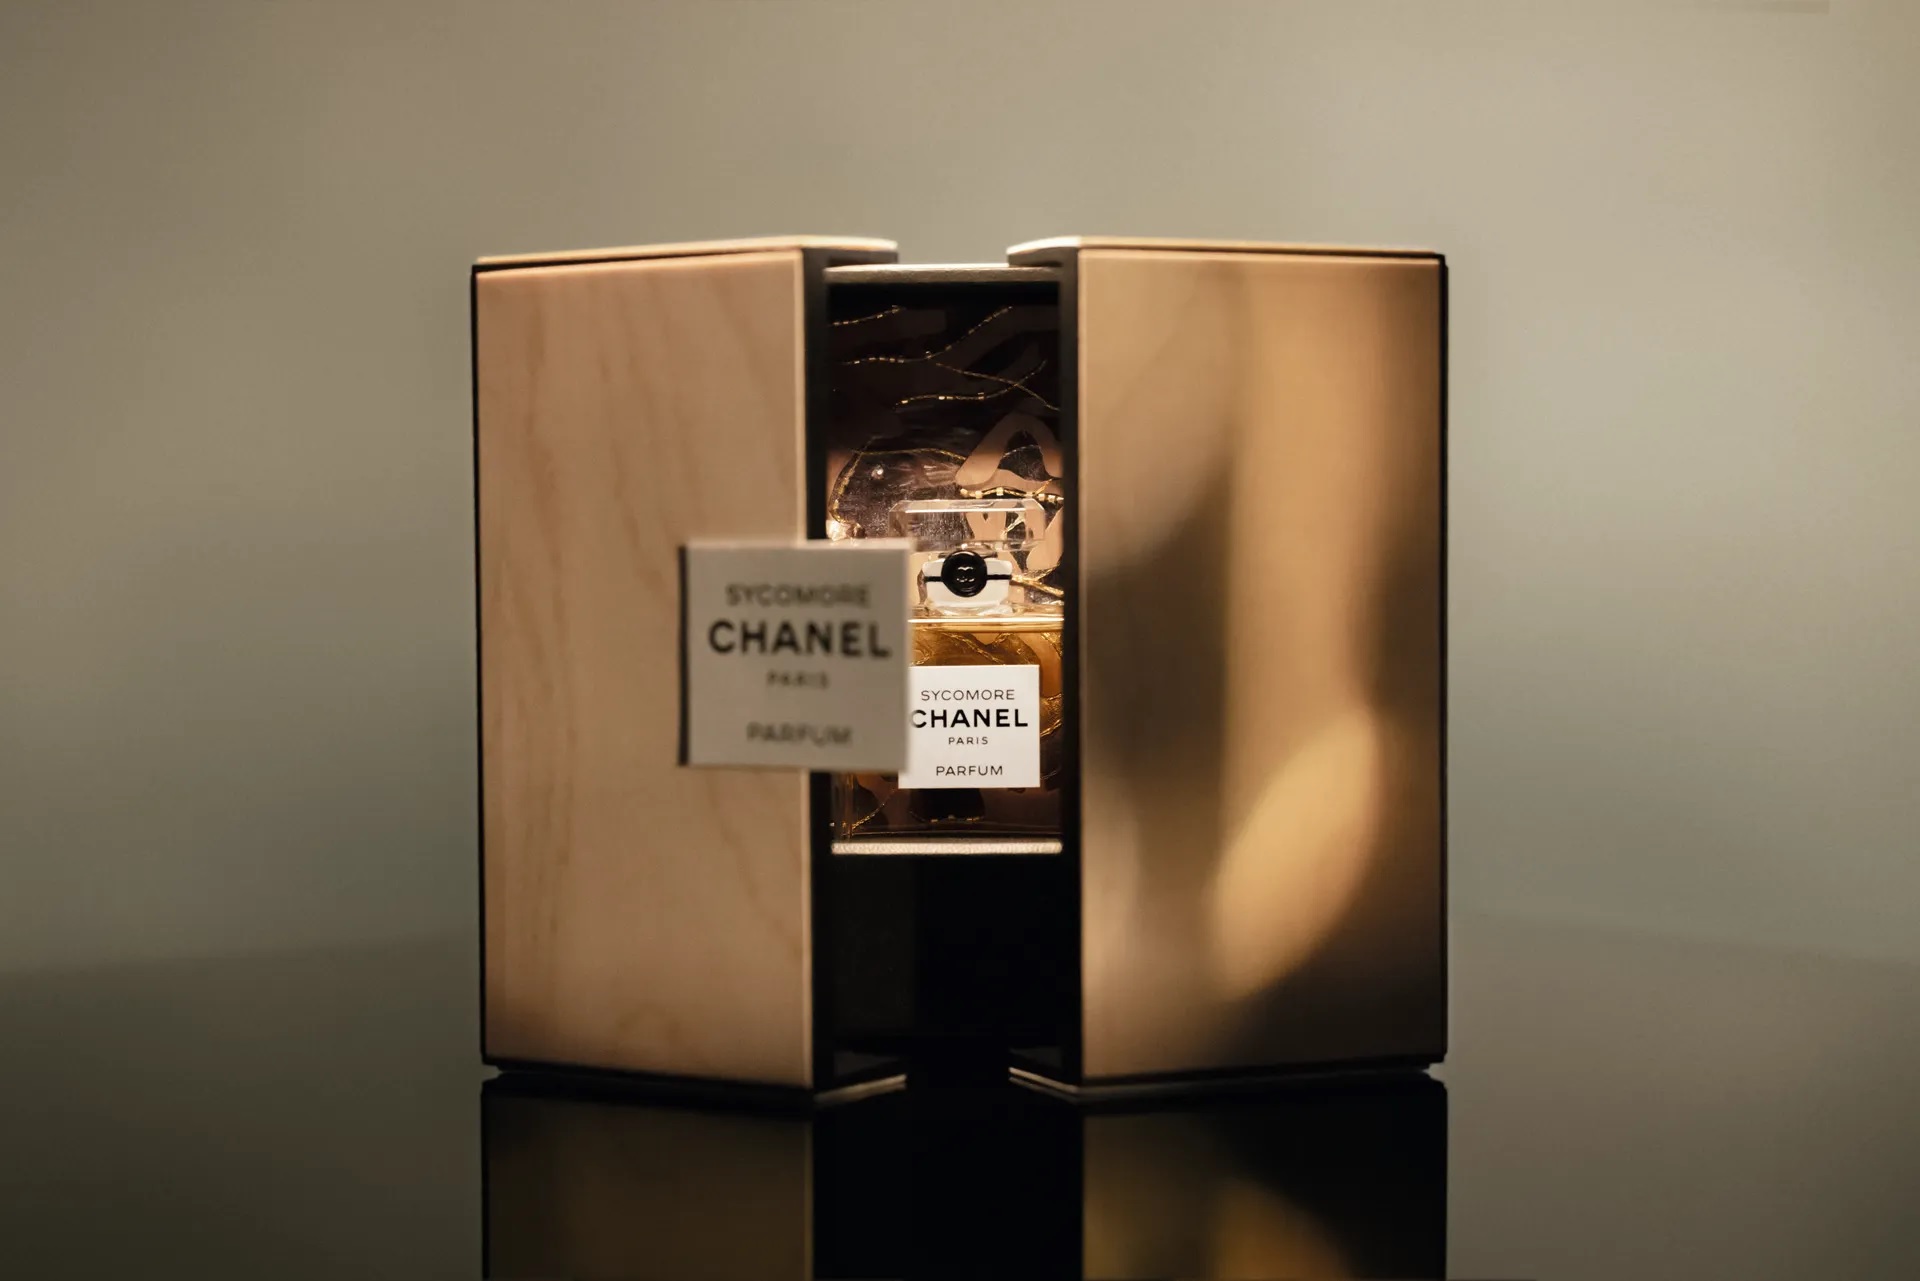 Sycomore by CHANEL 2008.